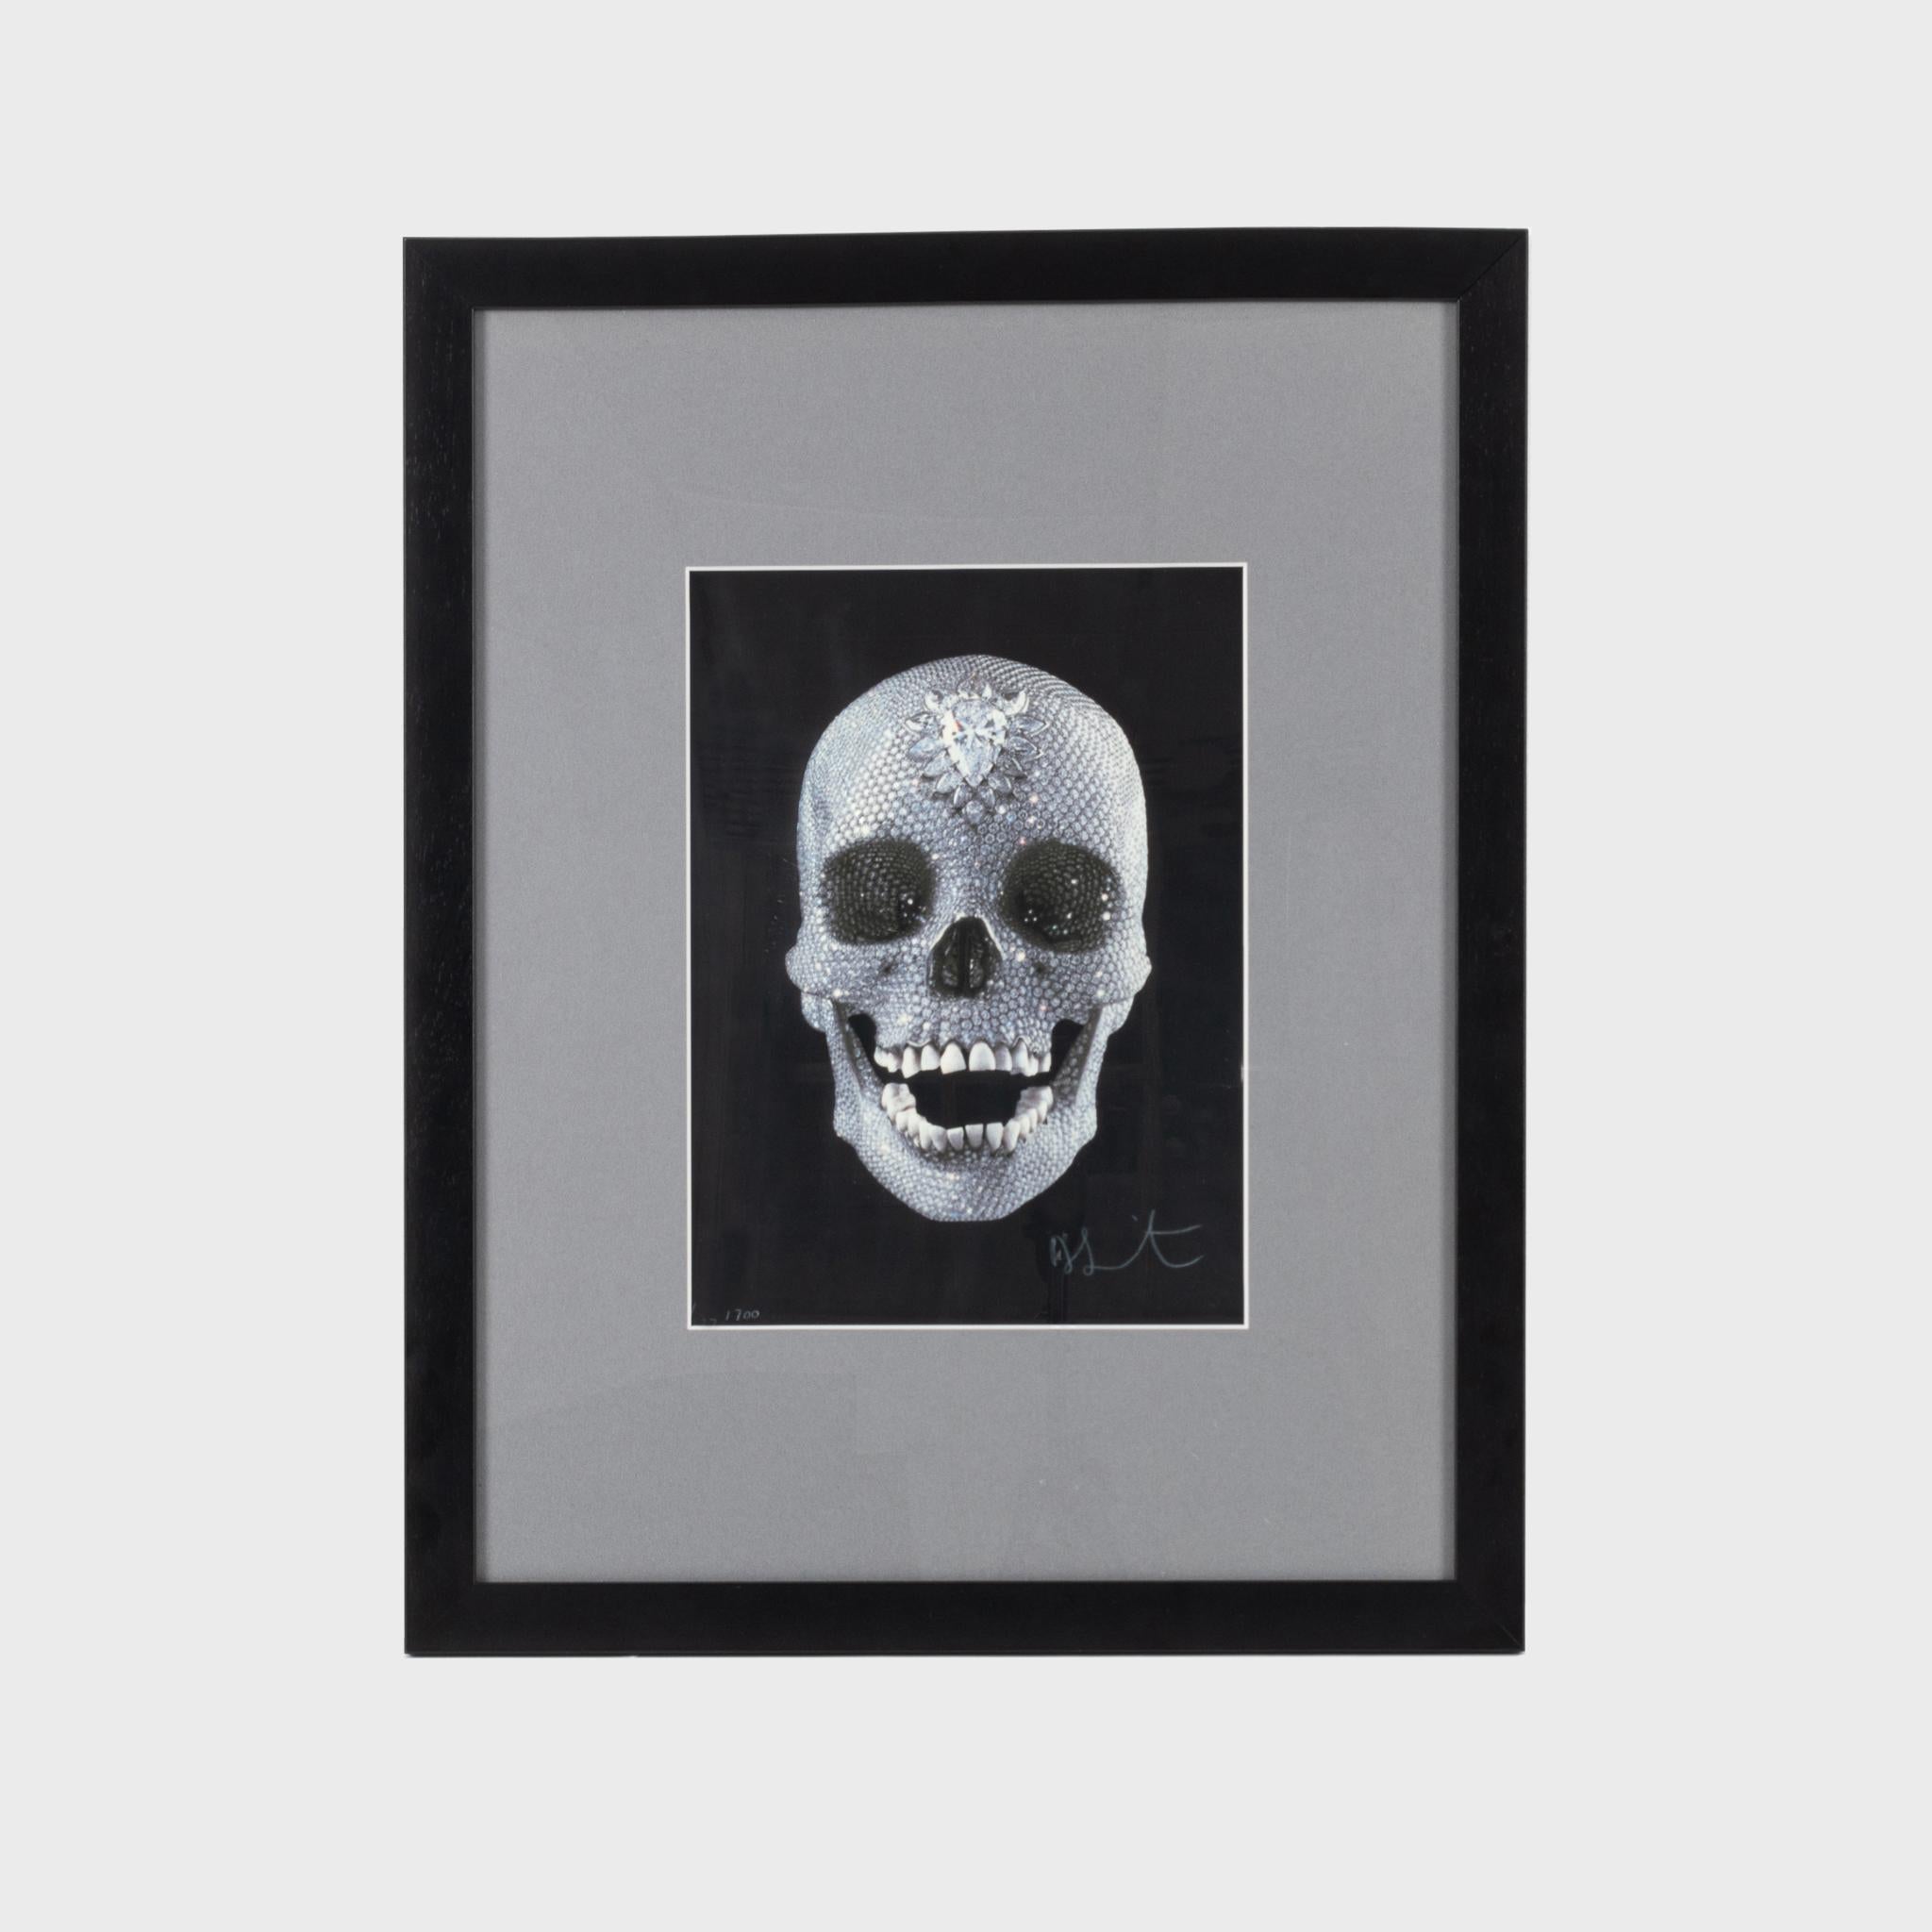 For the Love of God (Believe), 2007, Screenprint in colours - Print by Damien Hirst